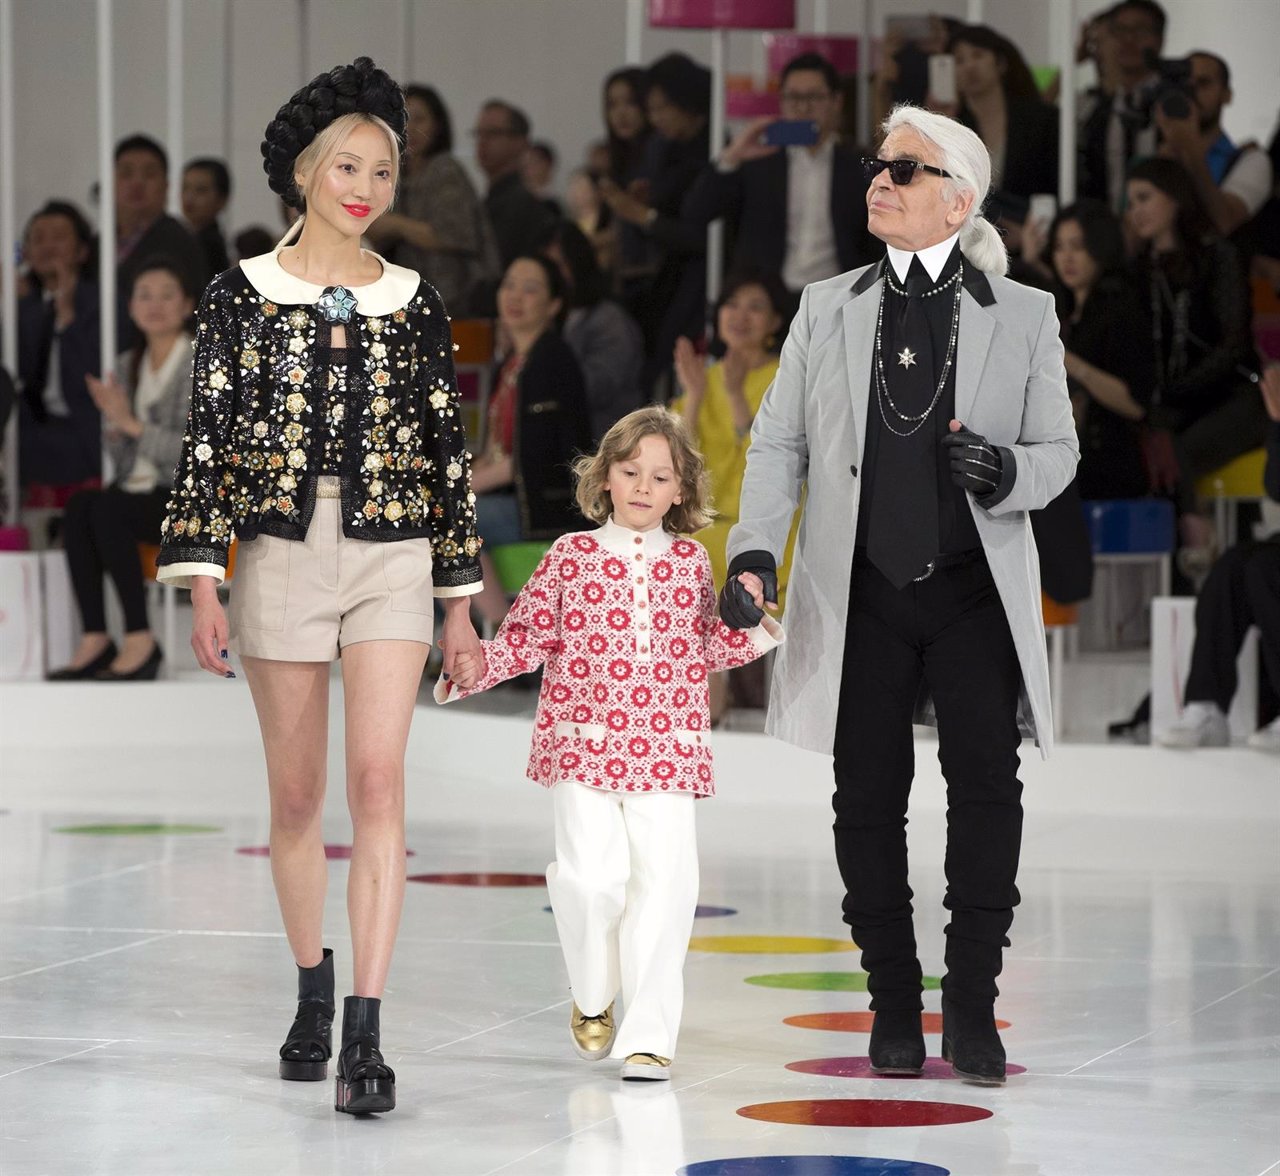 German designer Karl Lagerfeld appears at the end of the Chanel Cruise in Seoul 